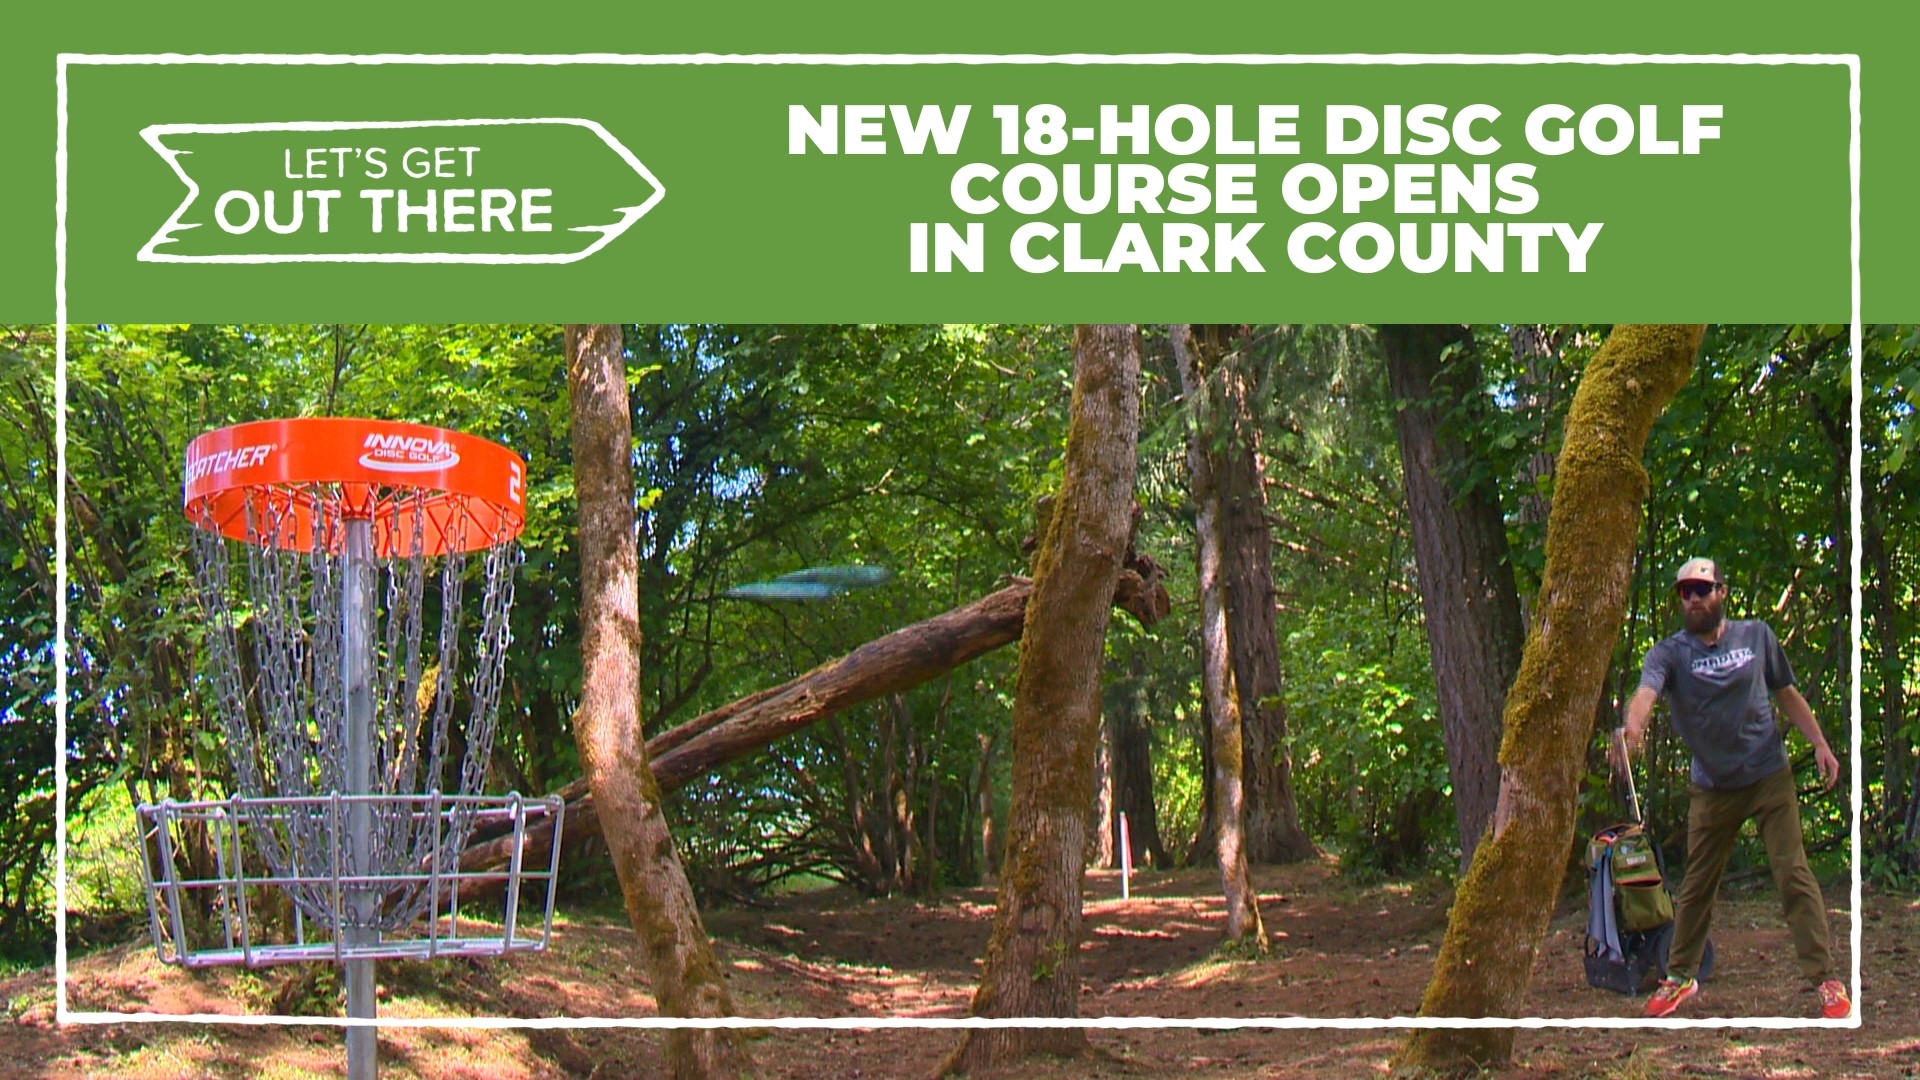 The course has been in the works since 2015 and is the first 18-hole disc golf course in Clark County.